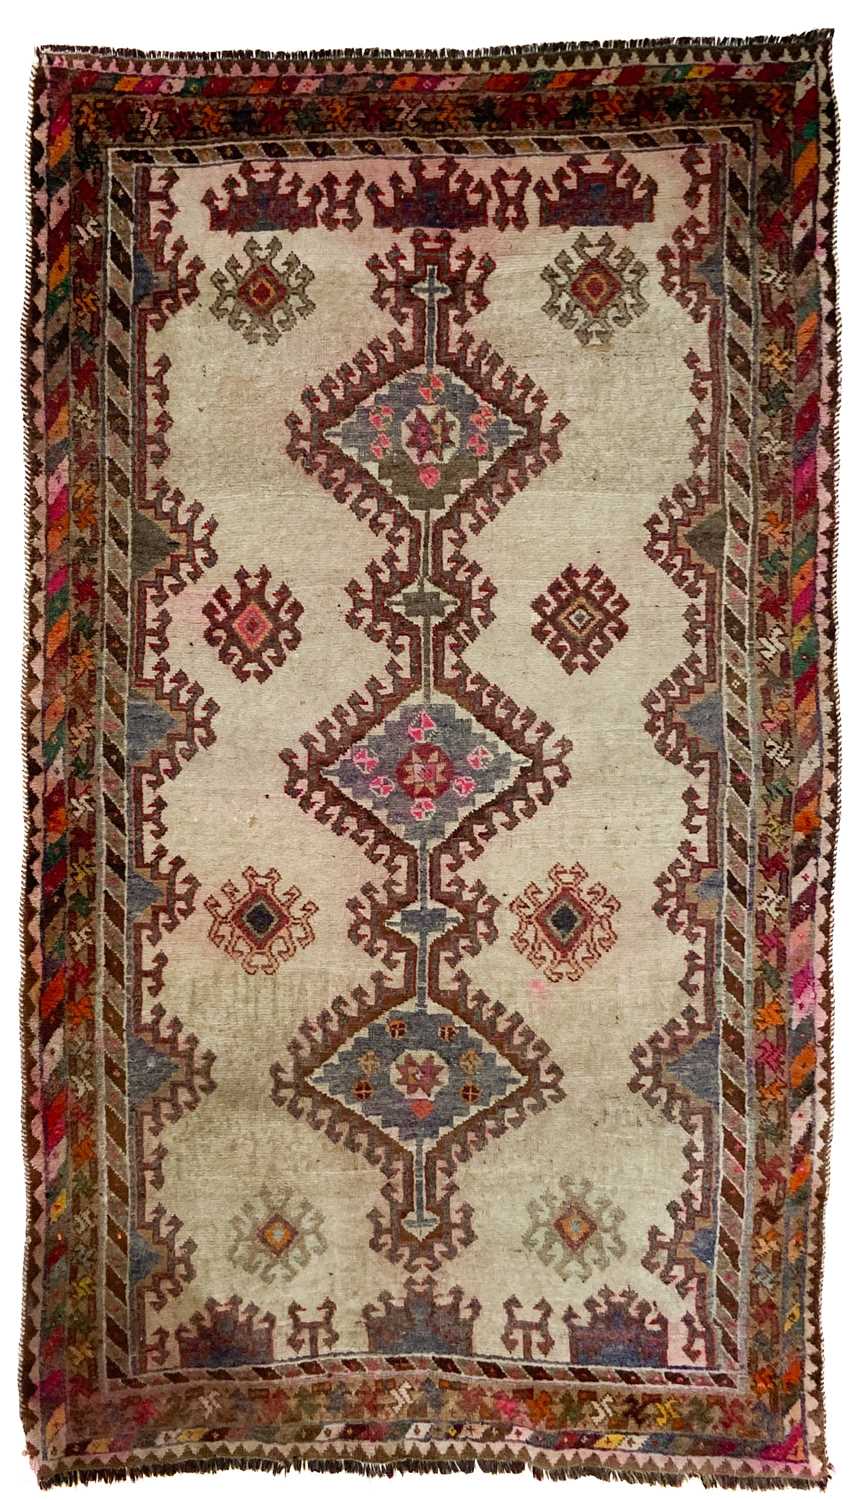 A Shiraz rug, South West Persia, mid 20th century.